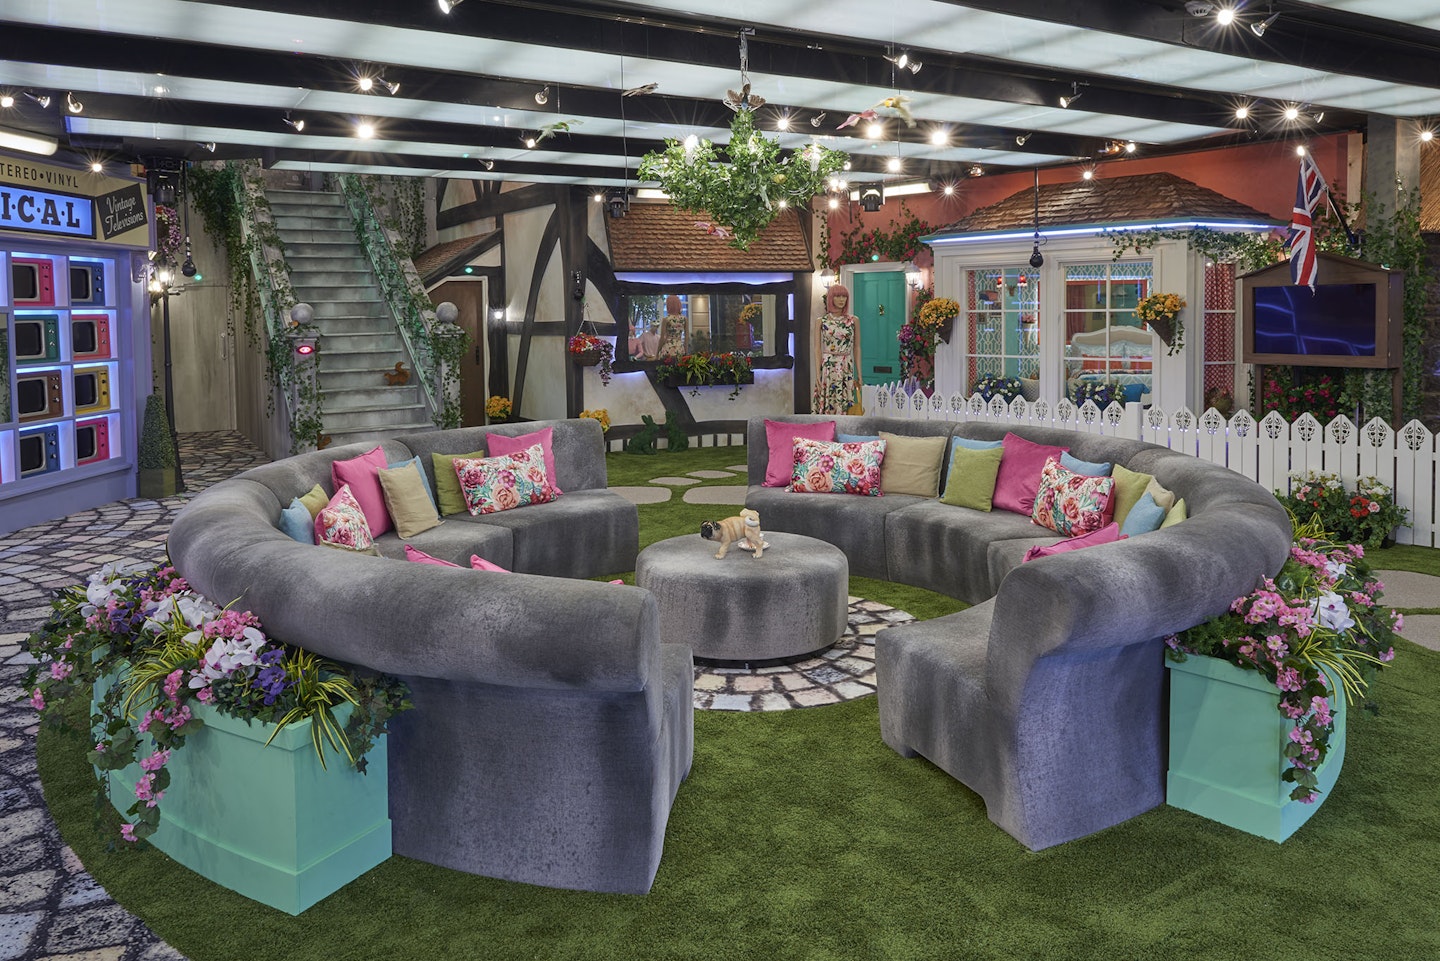 Big Brother House 